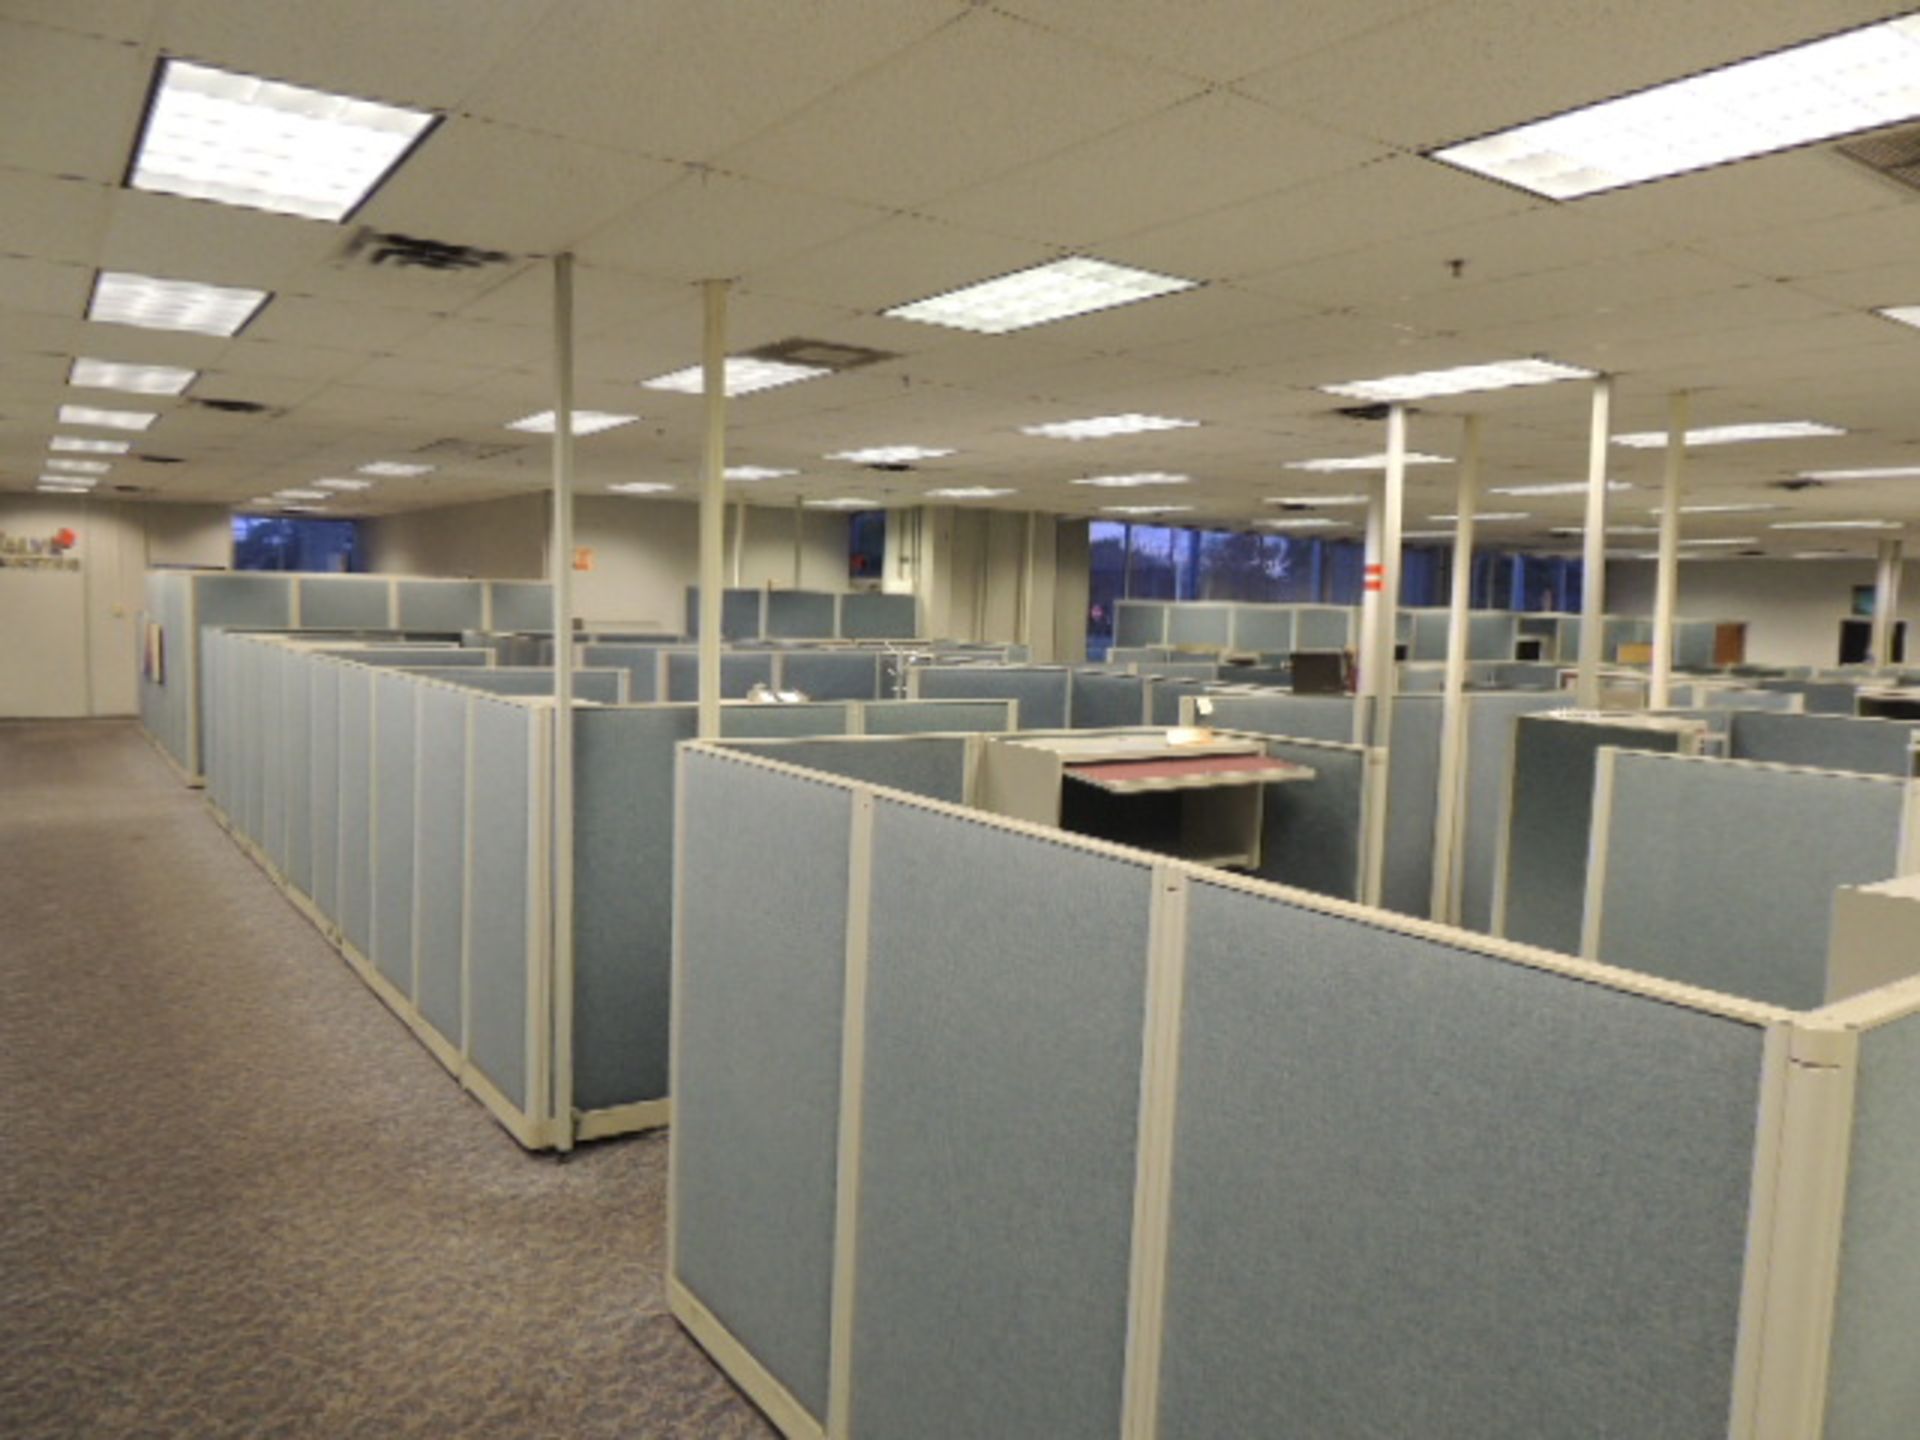 Office Cubicles & Contents. Lot: (8) offices w/ wooden and metal desks, file cabinets and lateral - Image 21 of 47